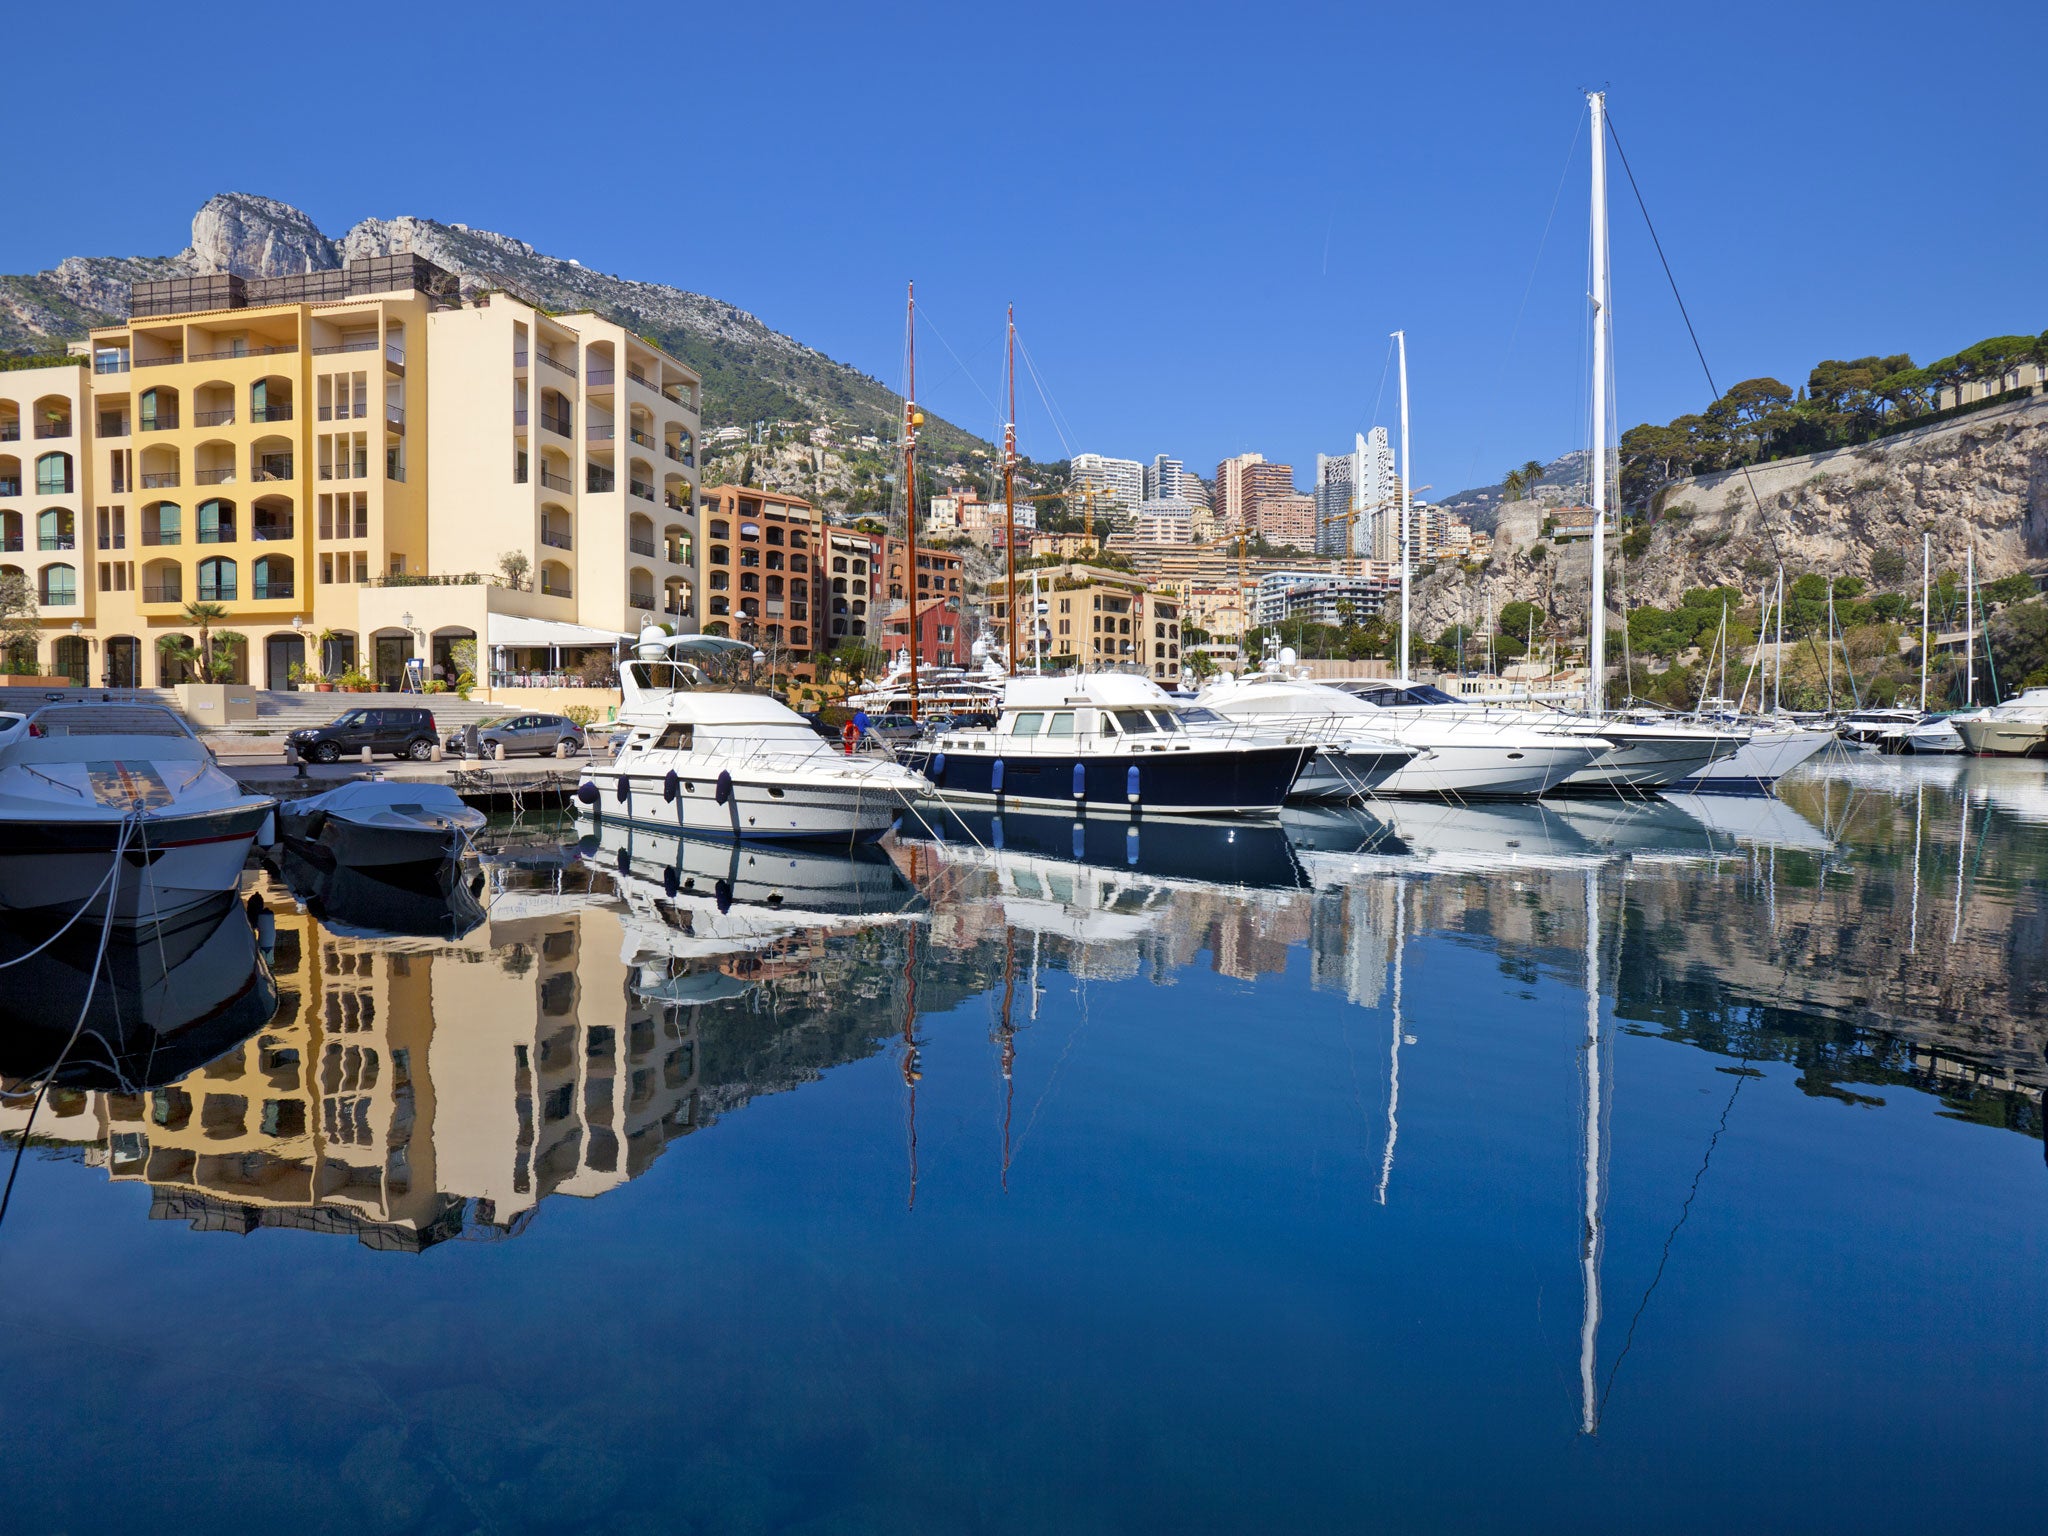 Luxury yachts and apartment buildings reflected in the calm waters of Fontvieille harbor, Monaco